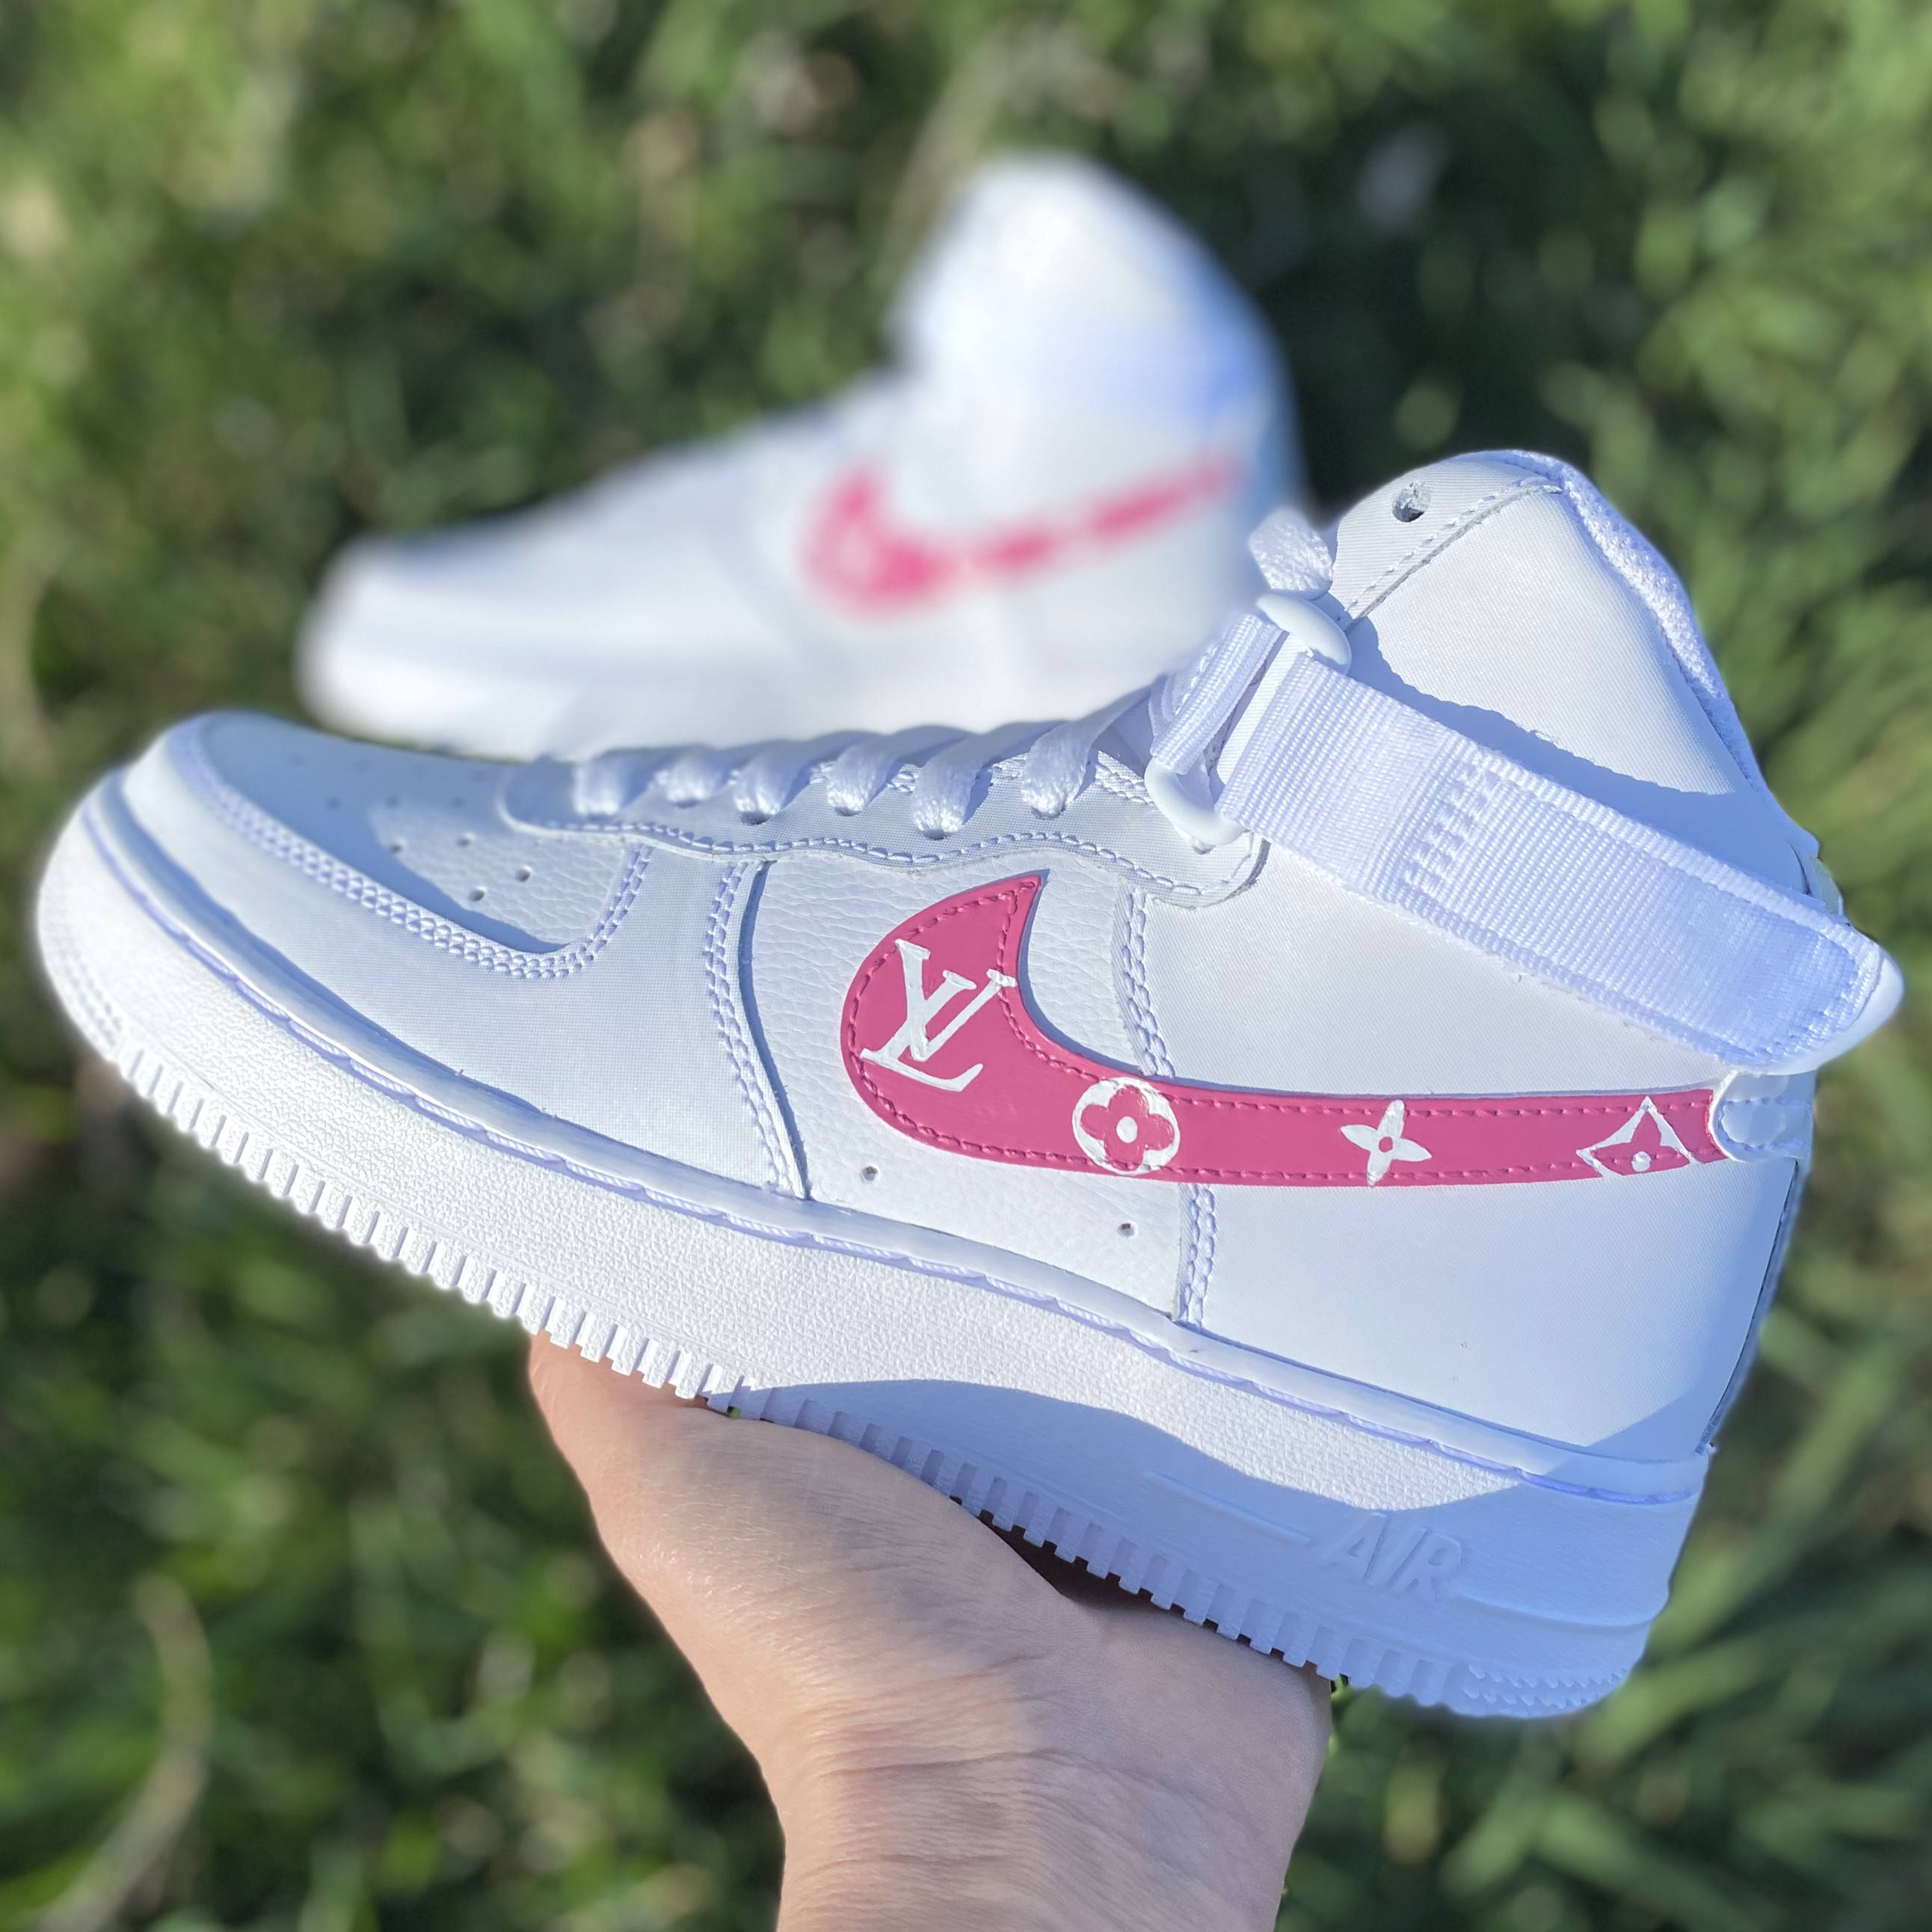 NEW Louis Vuitton Colorful Custom Air Force 1 Sneakers